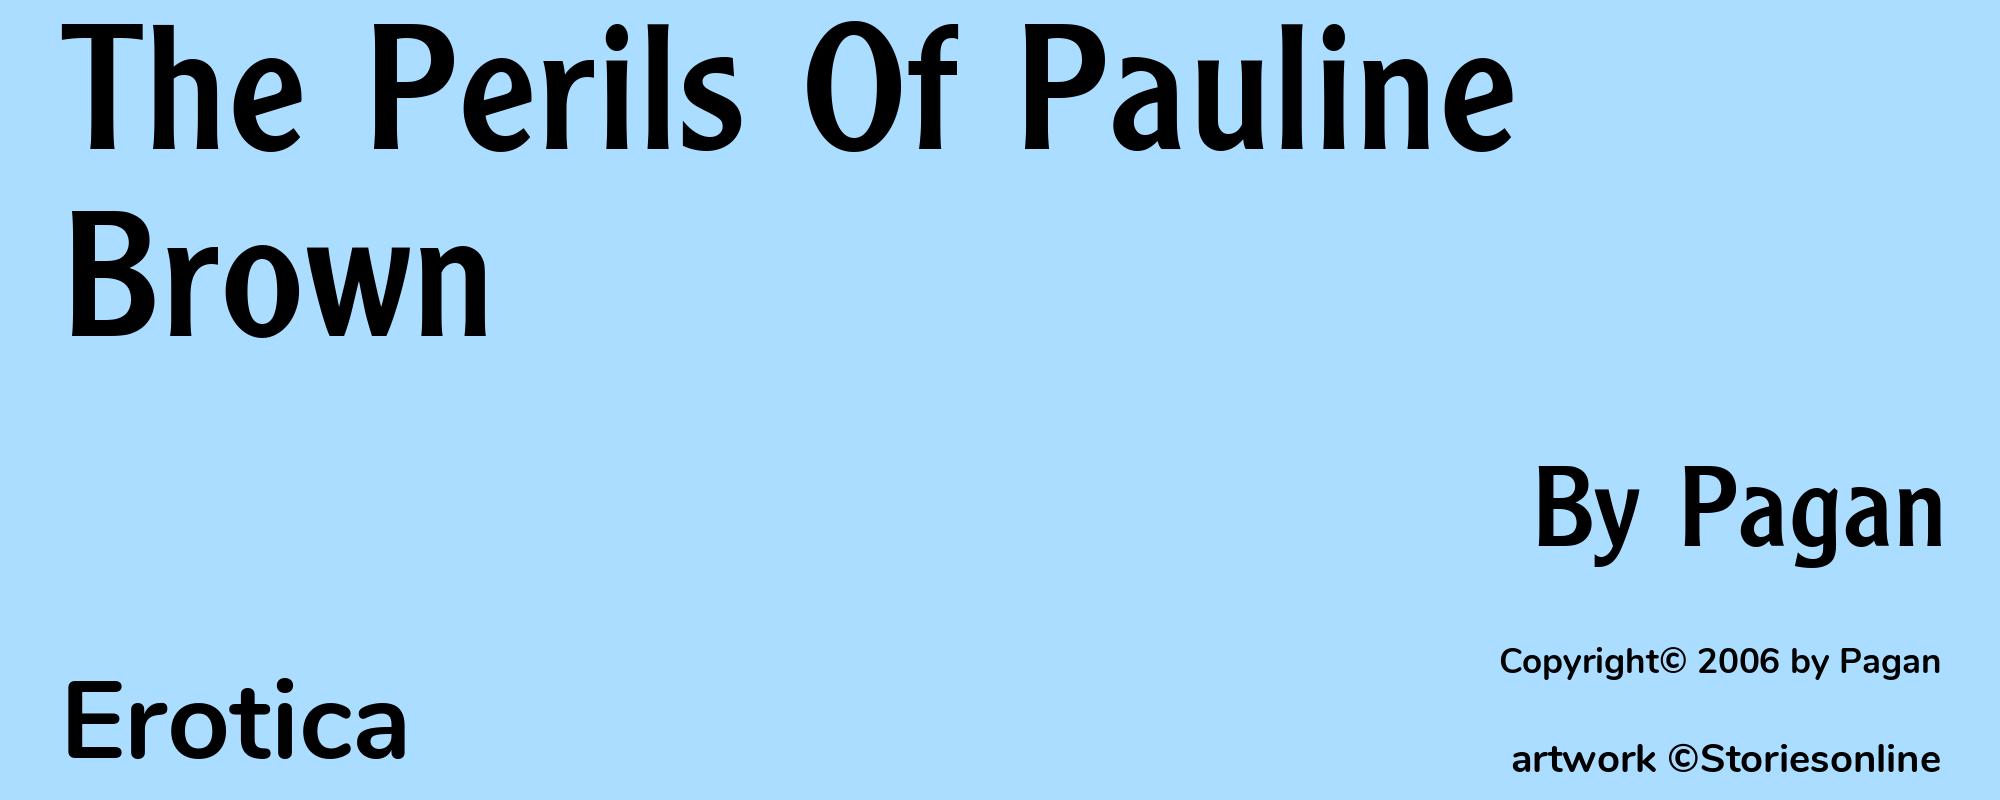 The Perils Of Pauline Brown - Cover